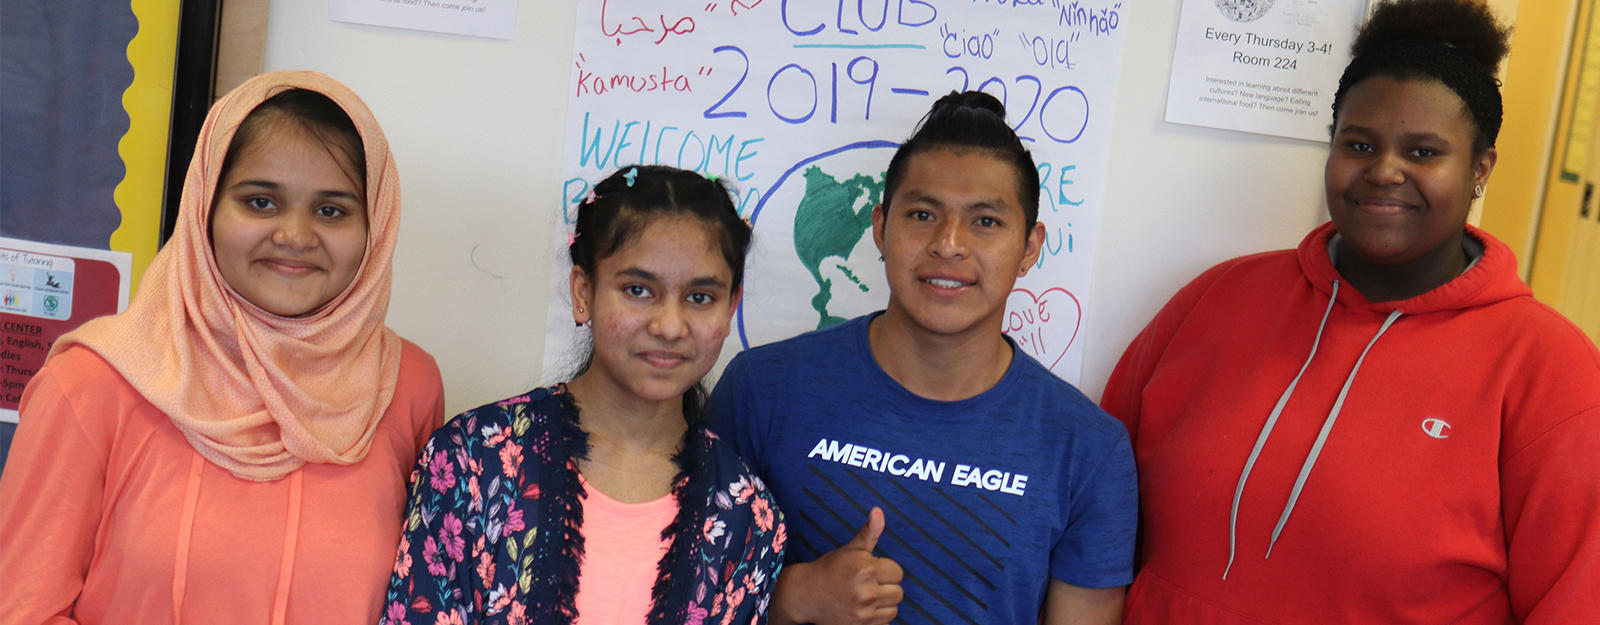 Students posing for a picture in front an International Club poster.